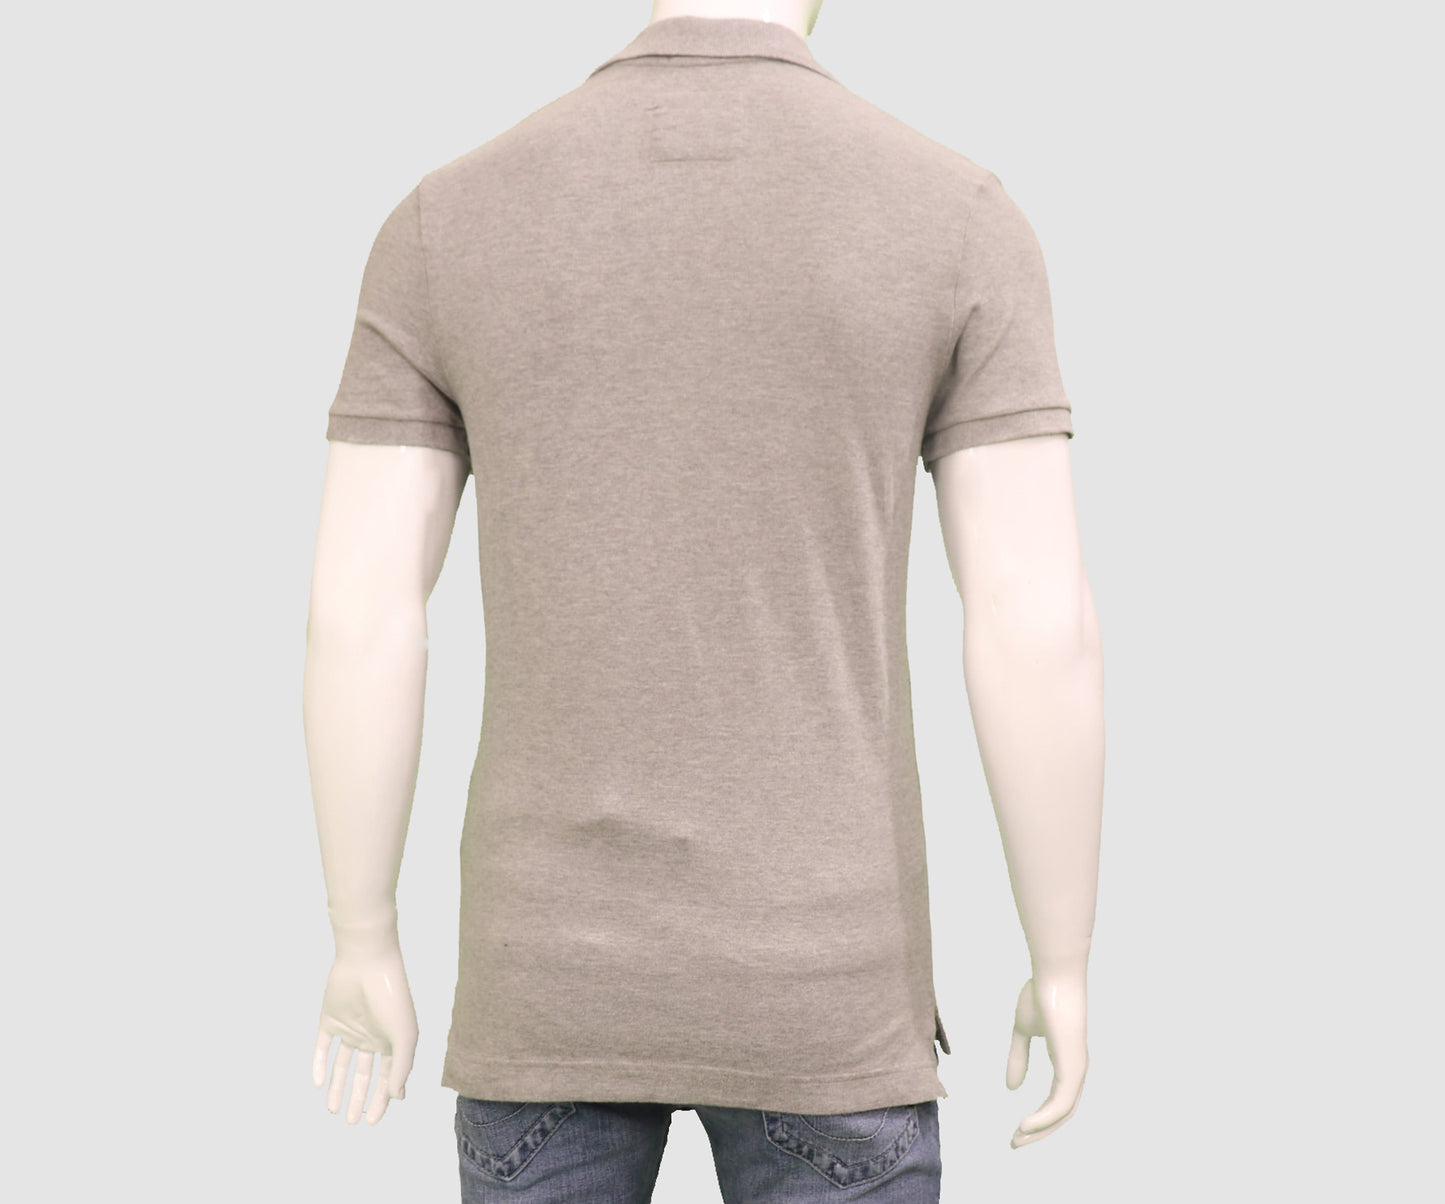 Abercrombie & Fitch Mens Tops M / Grey Short Sleeve Top